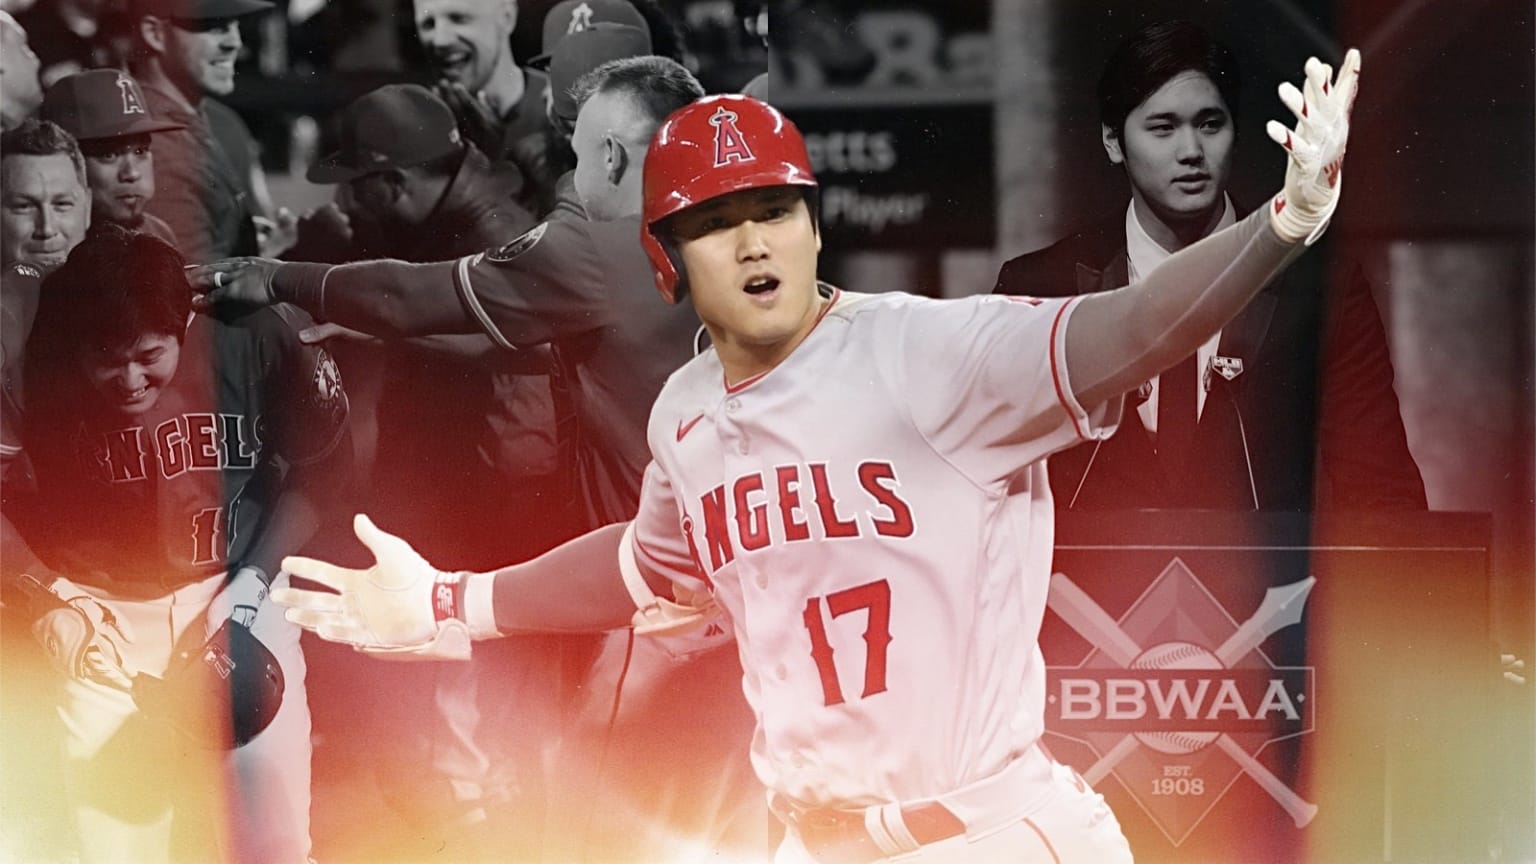 A photo collage shows three different images of Shohei Ohtani